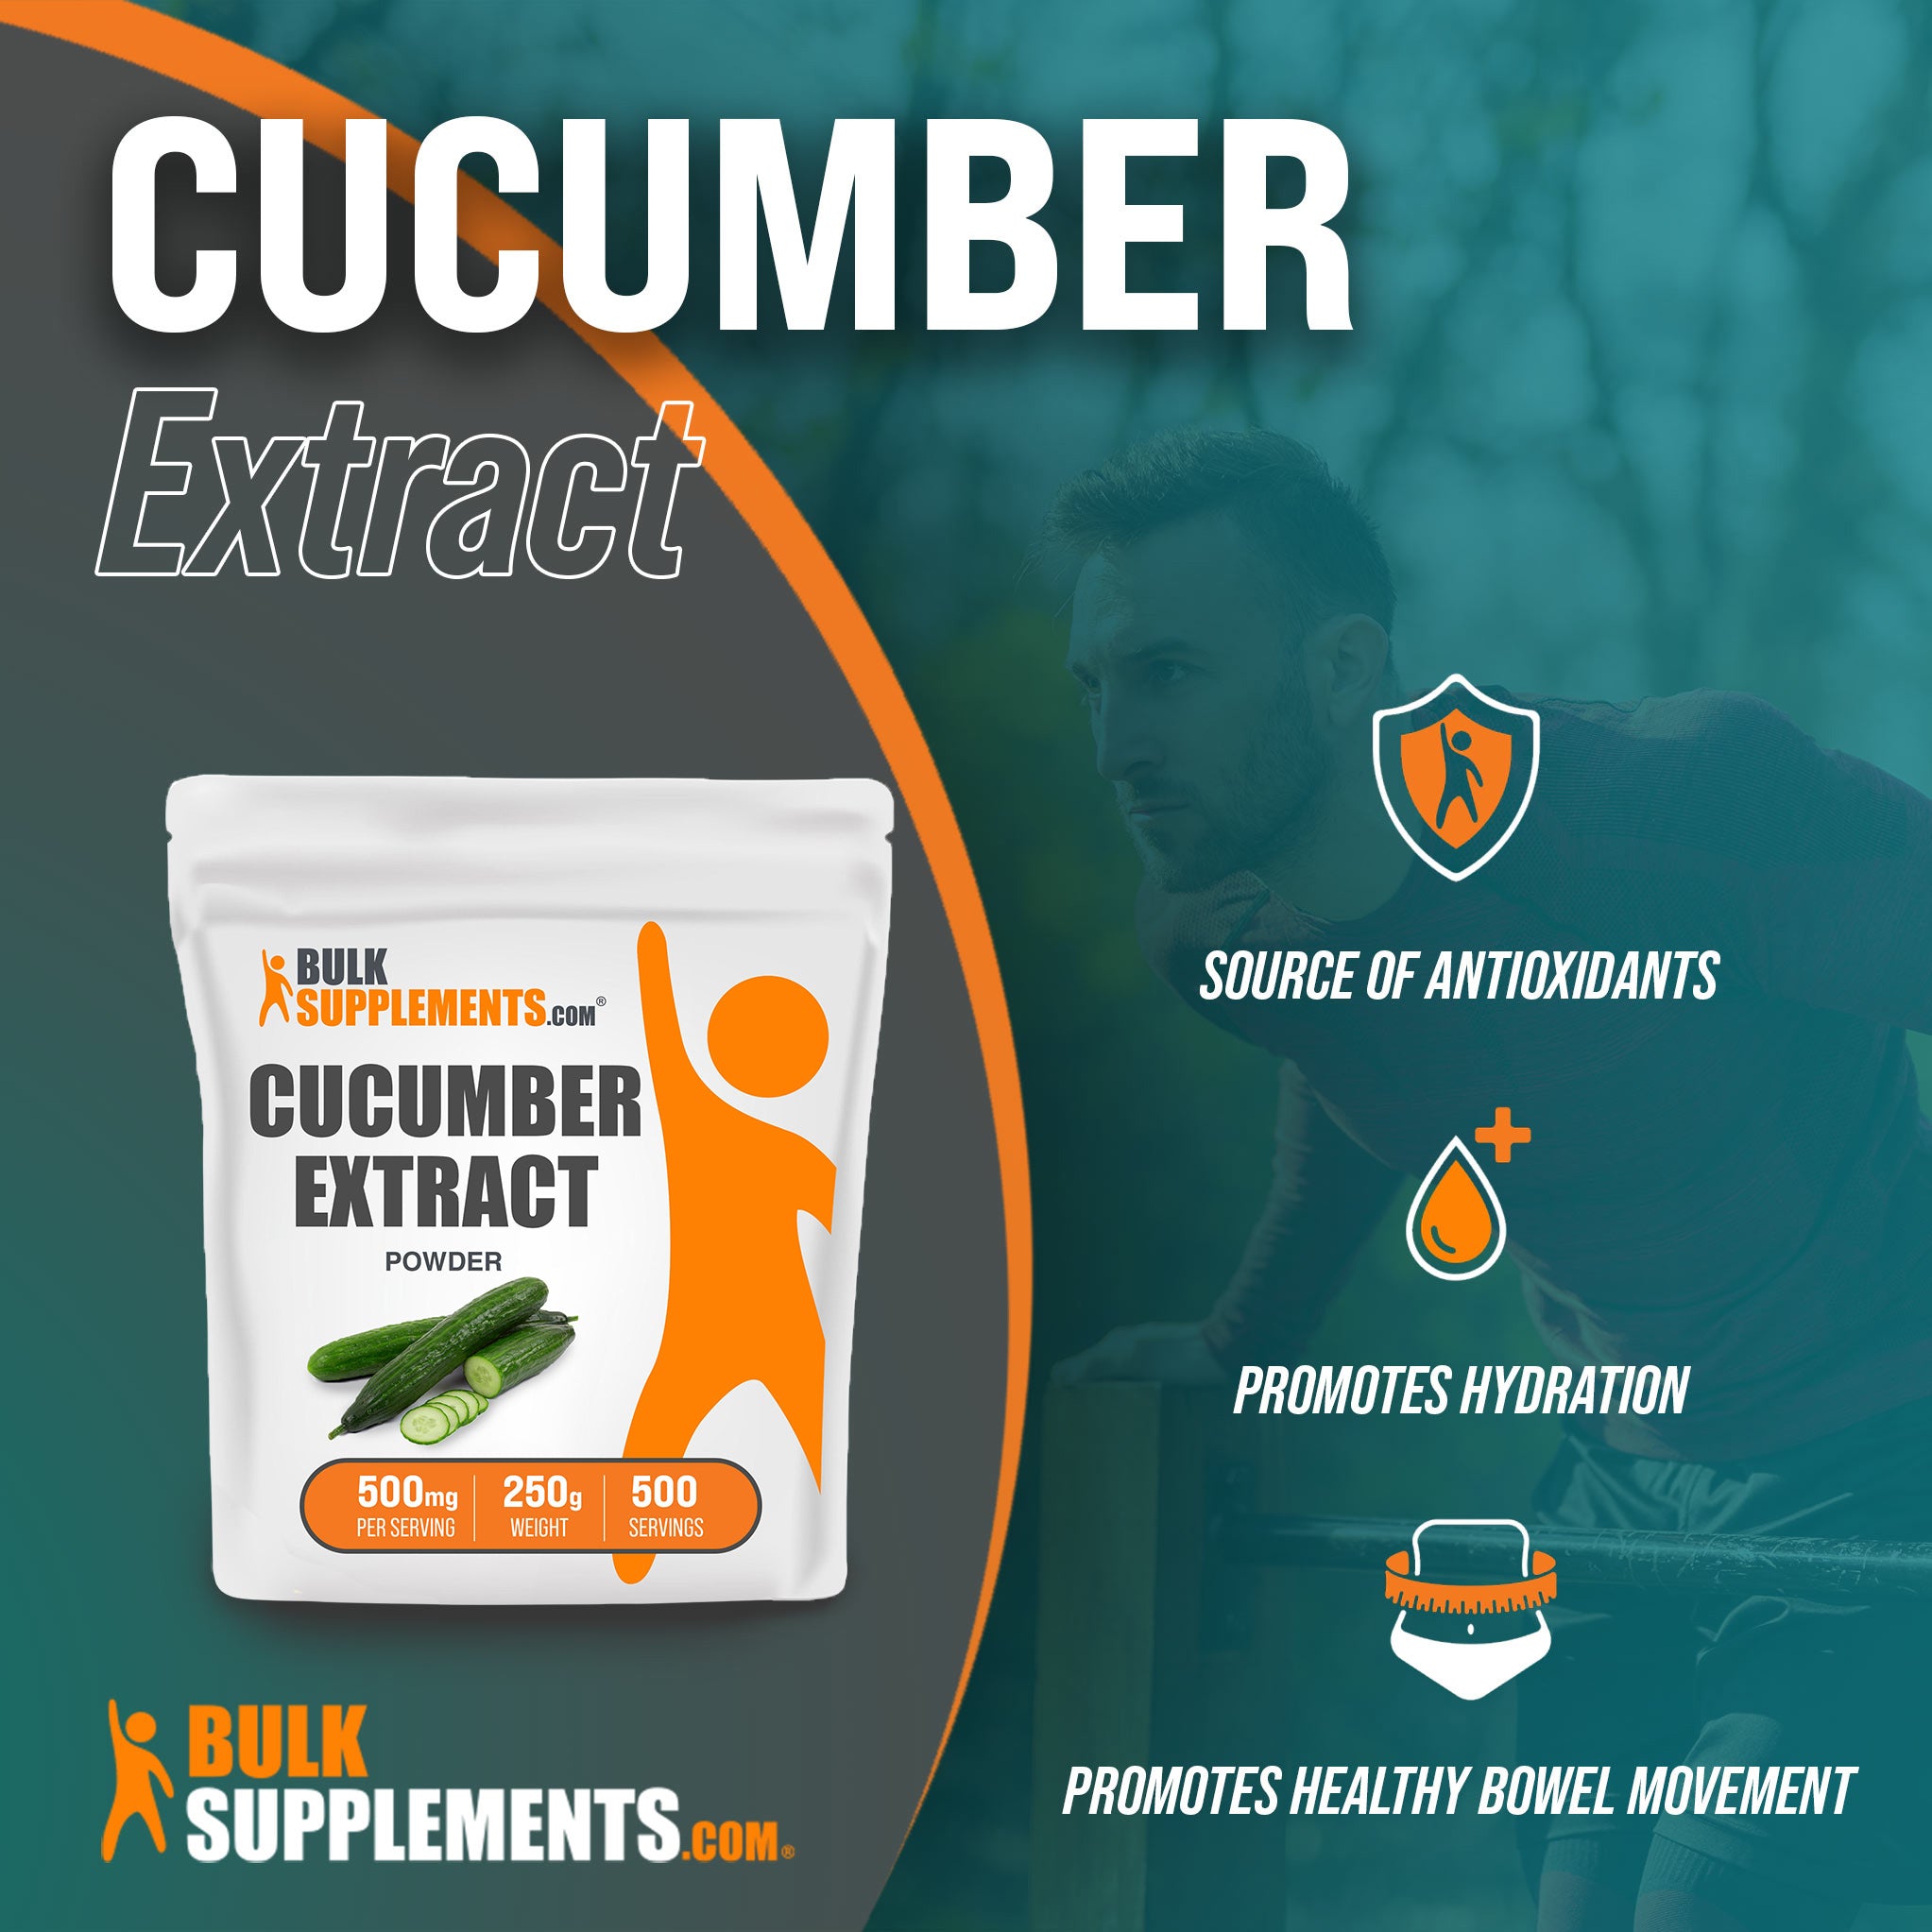 Benefits of Cucumber Extract; source of antioxidants, promotes hydration, promotes healthy bowel movement